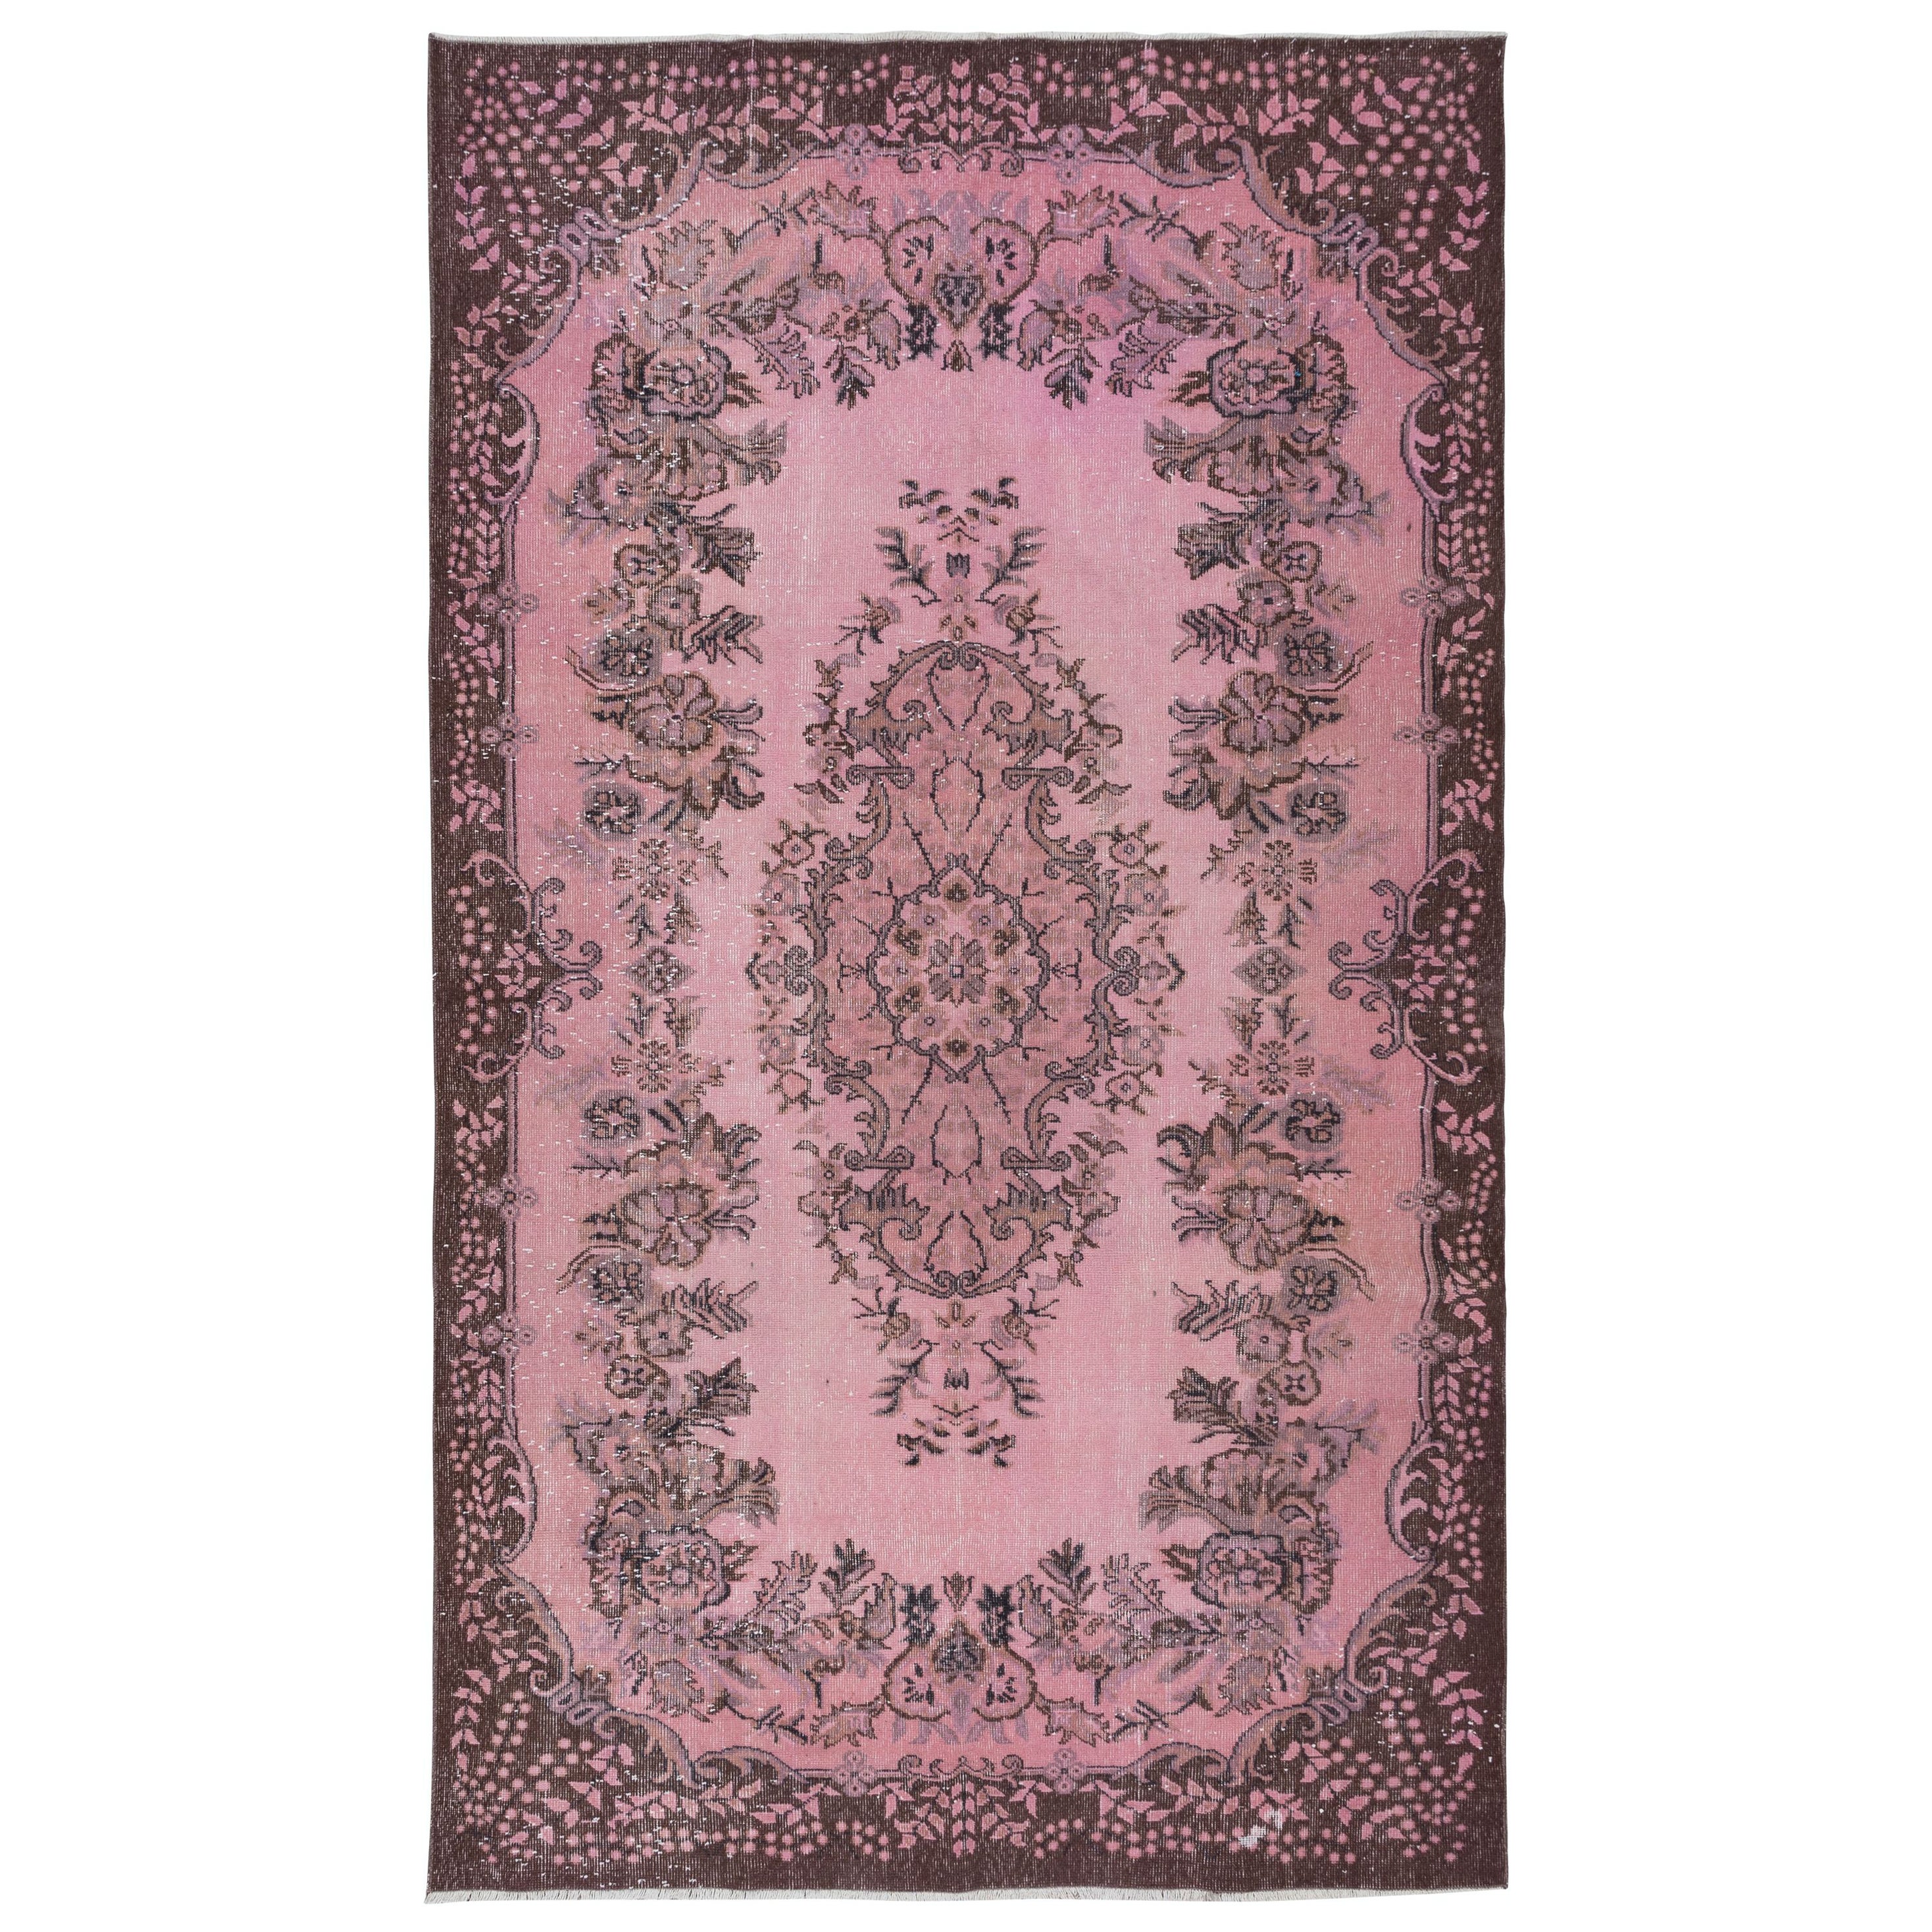 6x9.8 Ft Pink Area Rug for Modern Interiors, Handmade Turkish Carpet For Sale